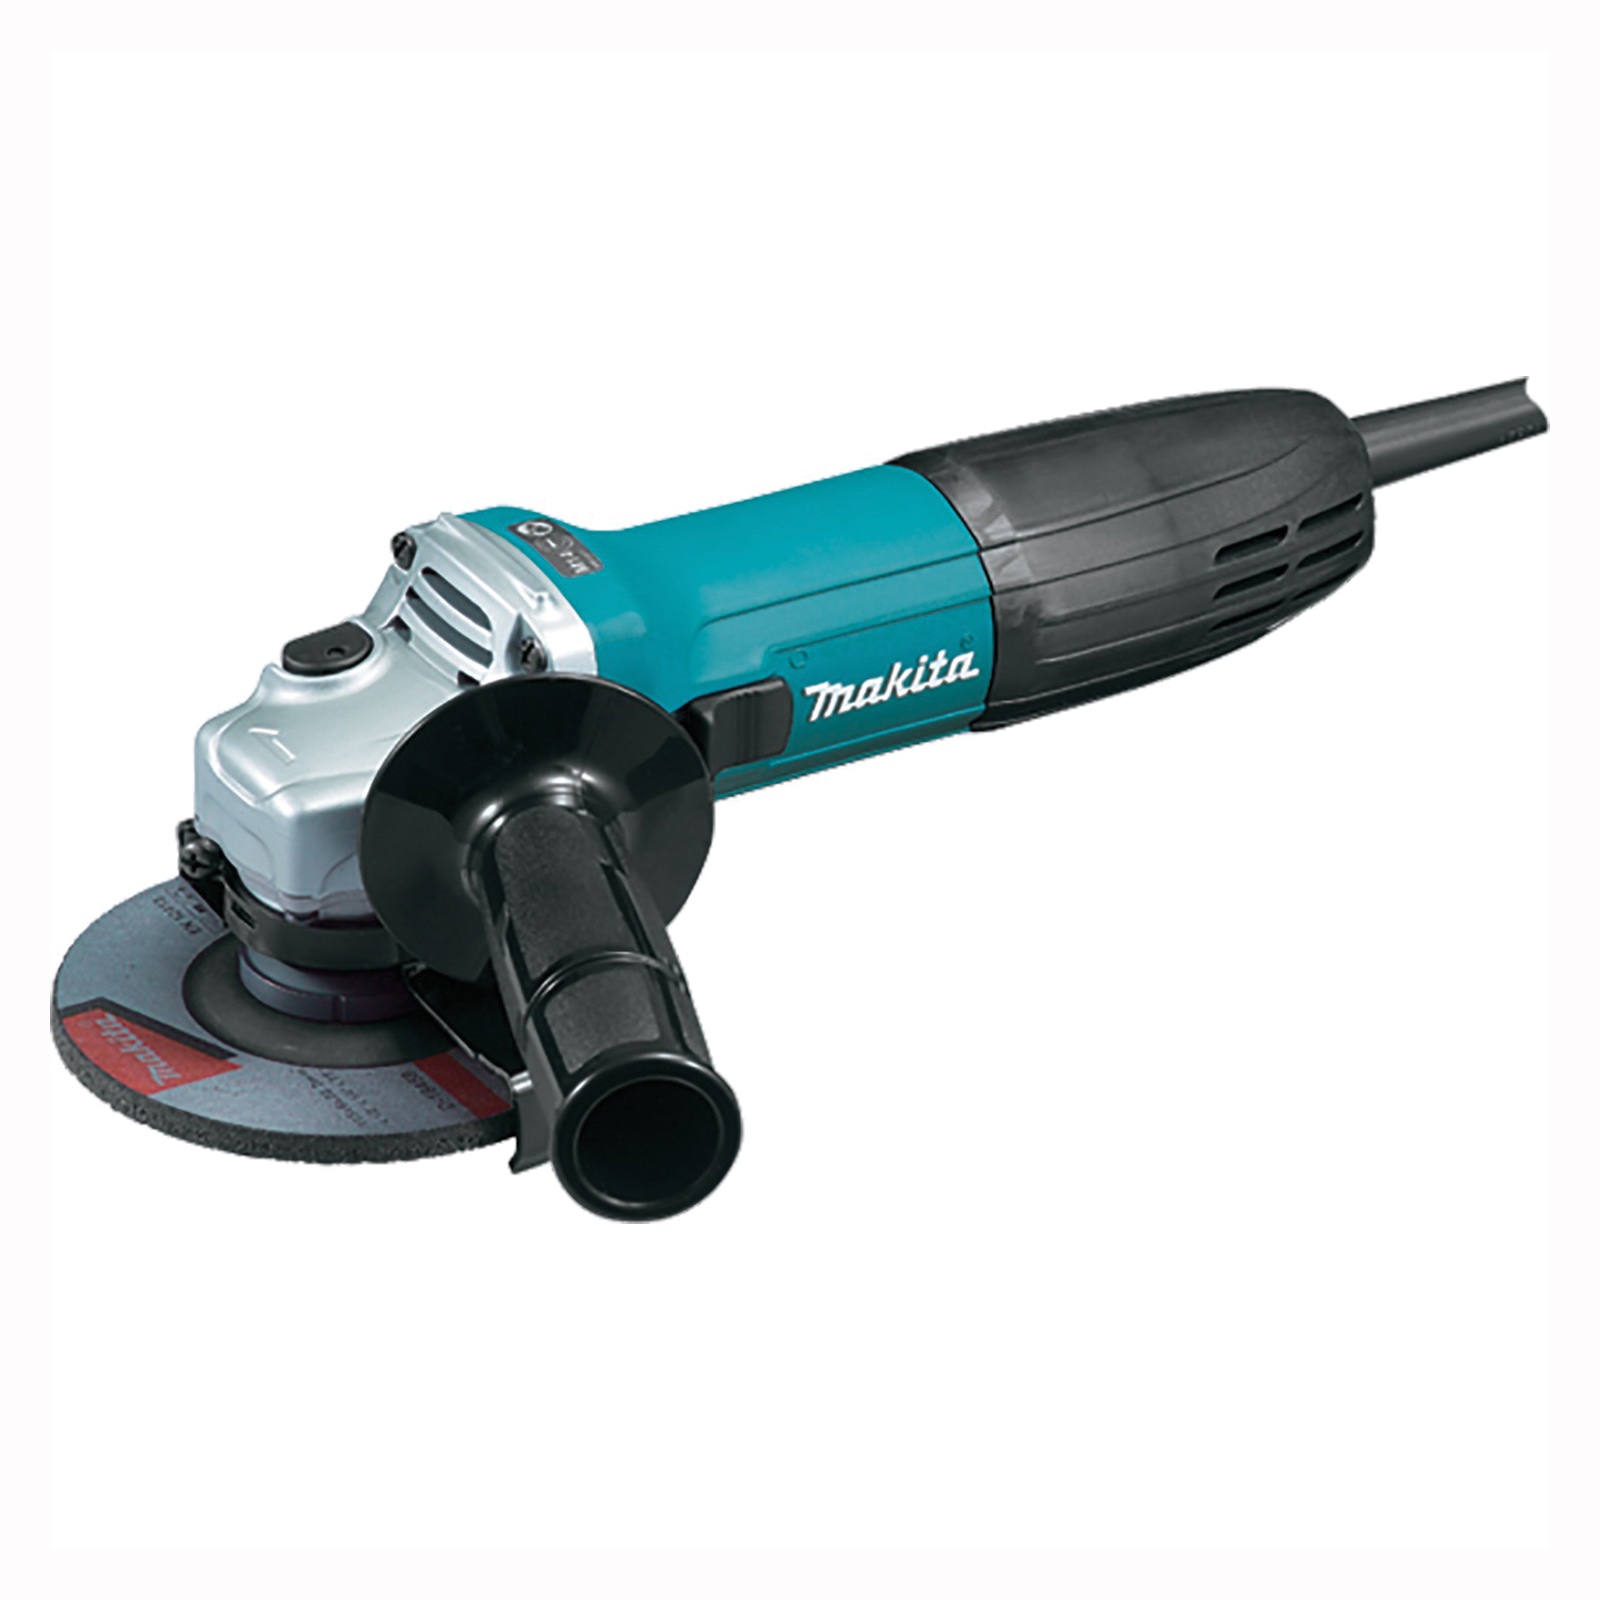 GA4530X Angle Grinder, 6 A, 4-1/2 in Dia Wheel, 11,000 rpm Speed